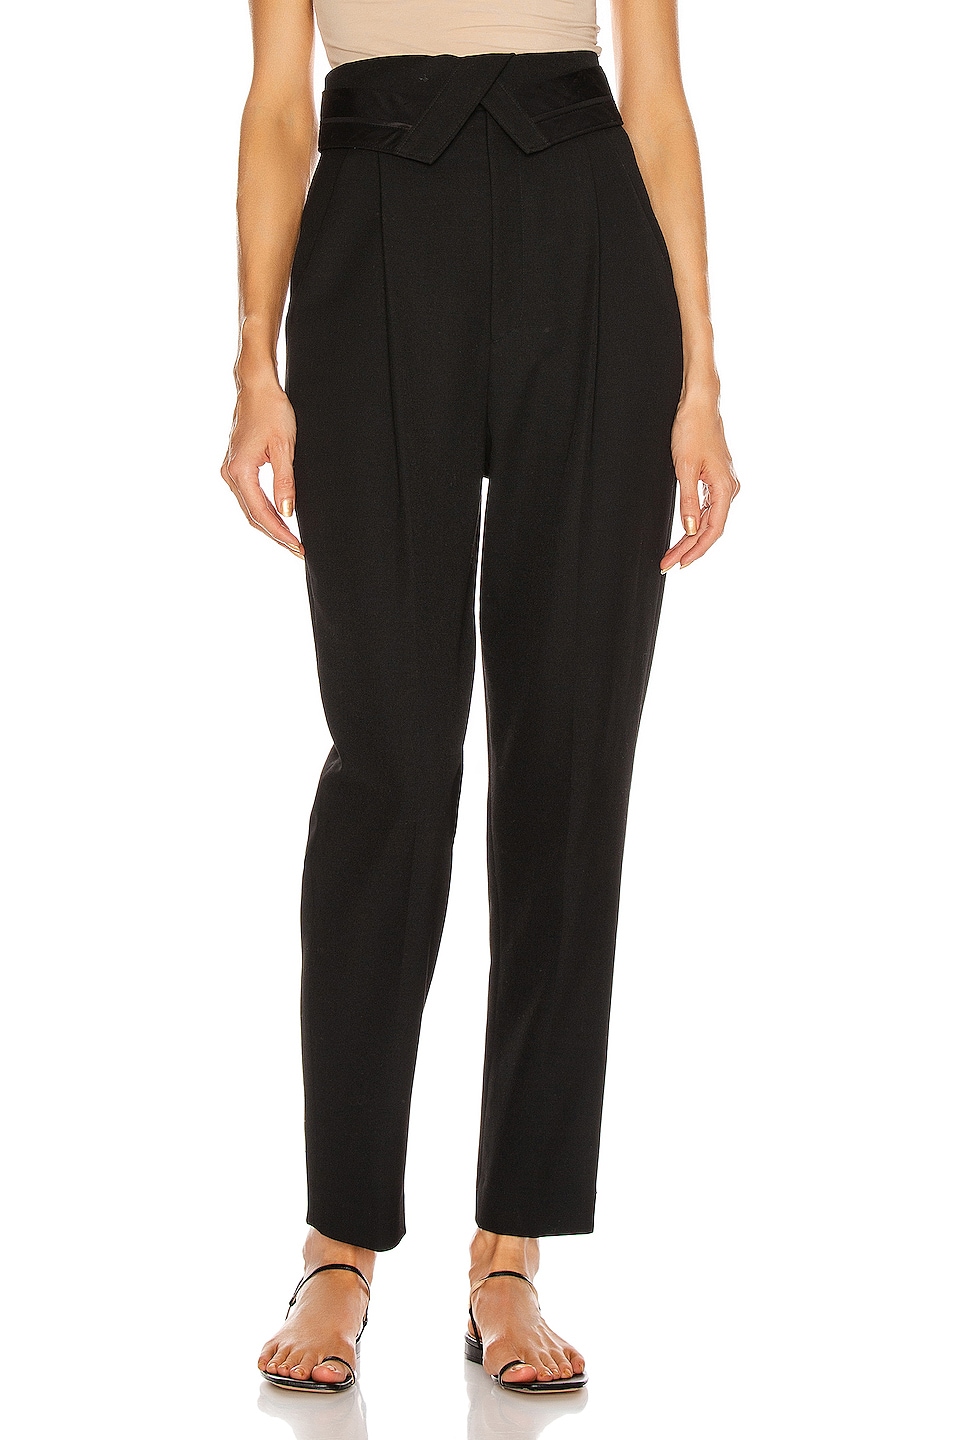 Image 1 of A.L.C. Cartright Pant in Black